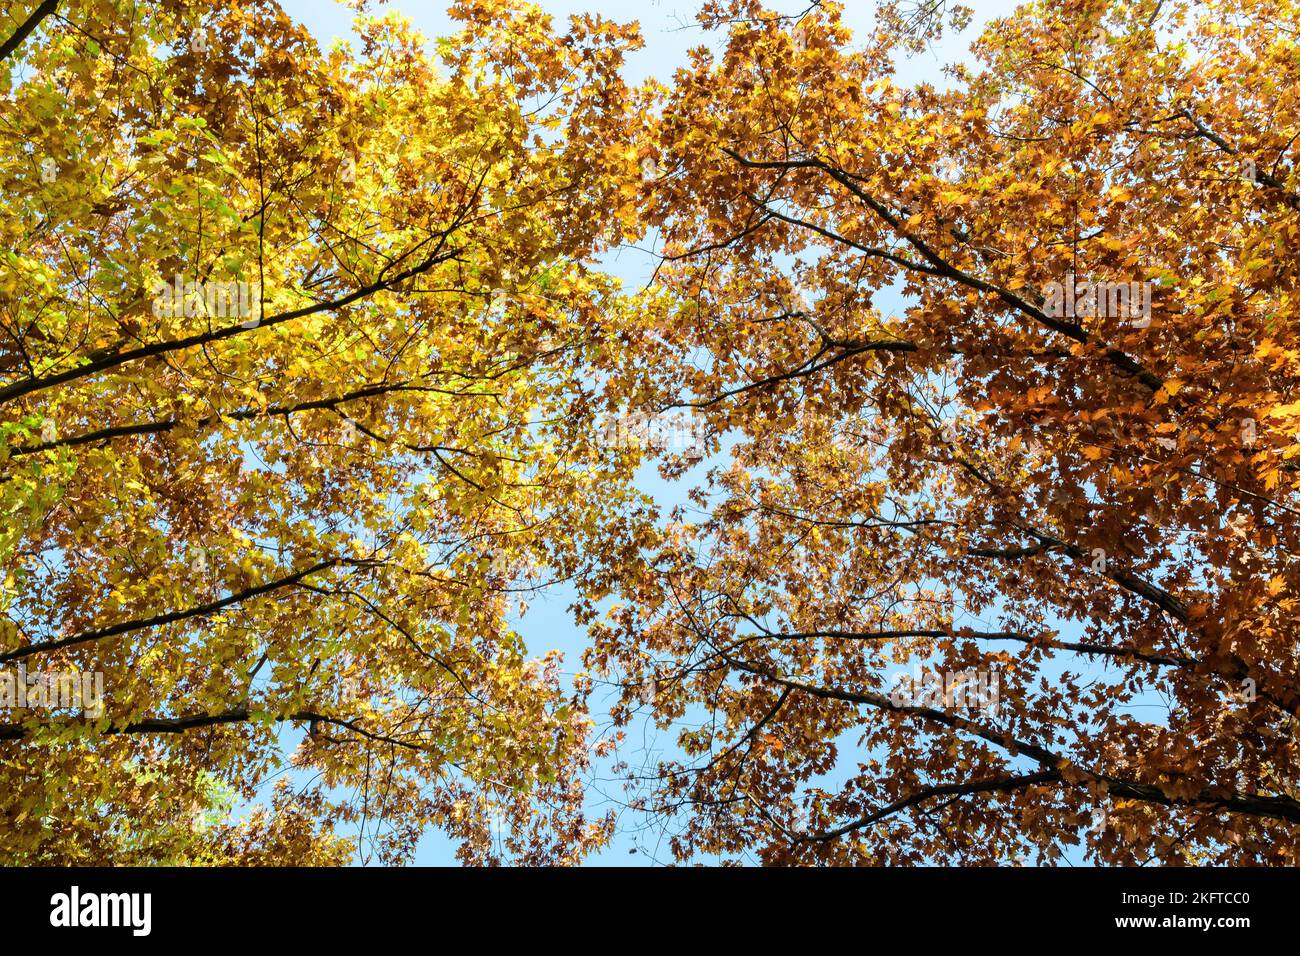 Different trees with green, yellow, orange and brown leaves towards clear blue sky in a garden during a sunny autumn day Stock Photo